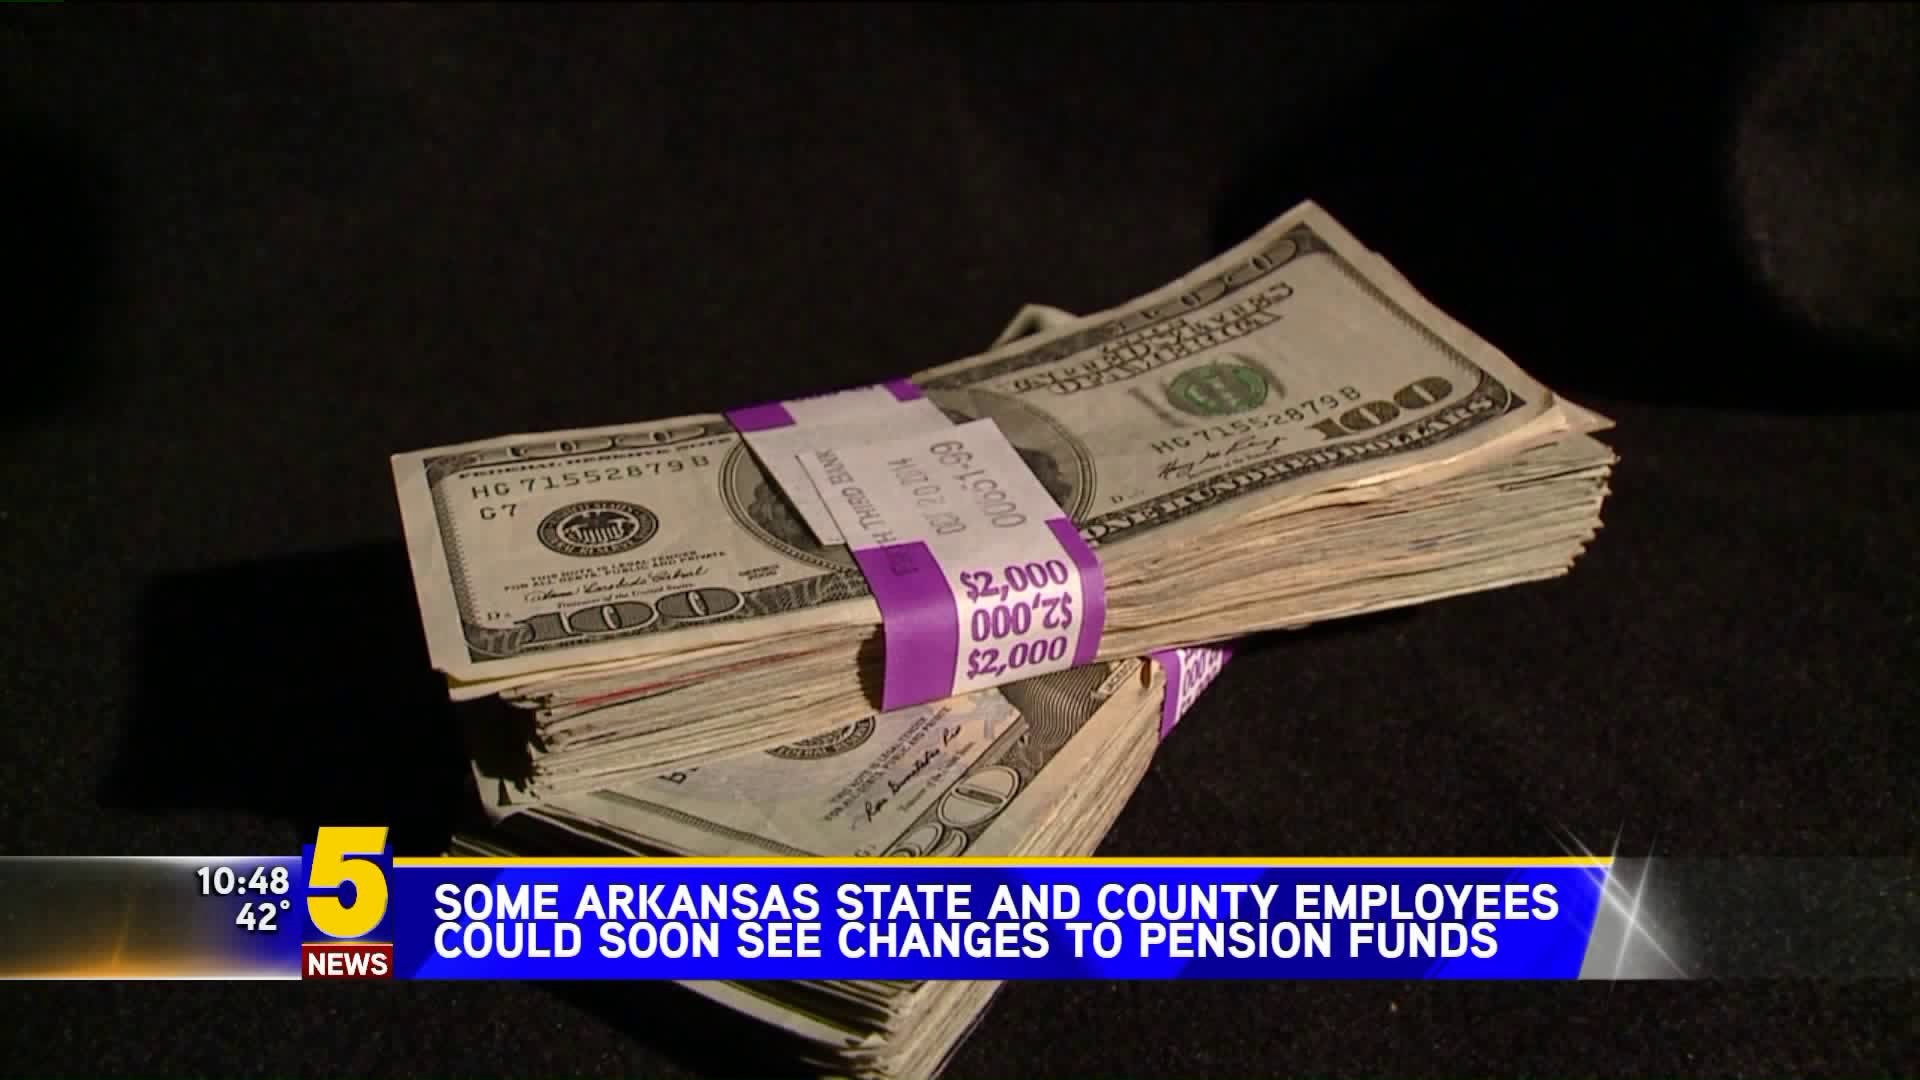 Arkansas State And County Employees Could See Changes To Their Retirement Funds